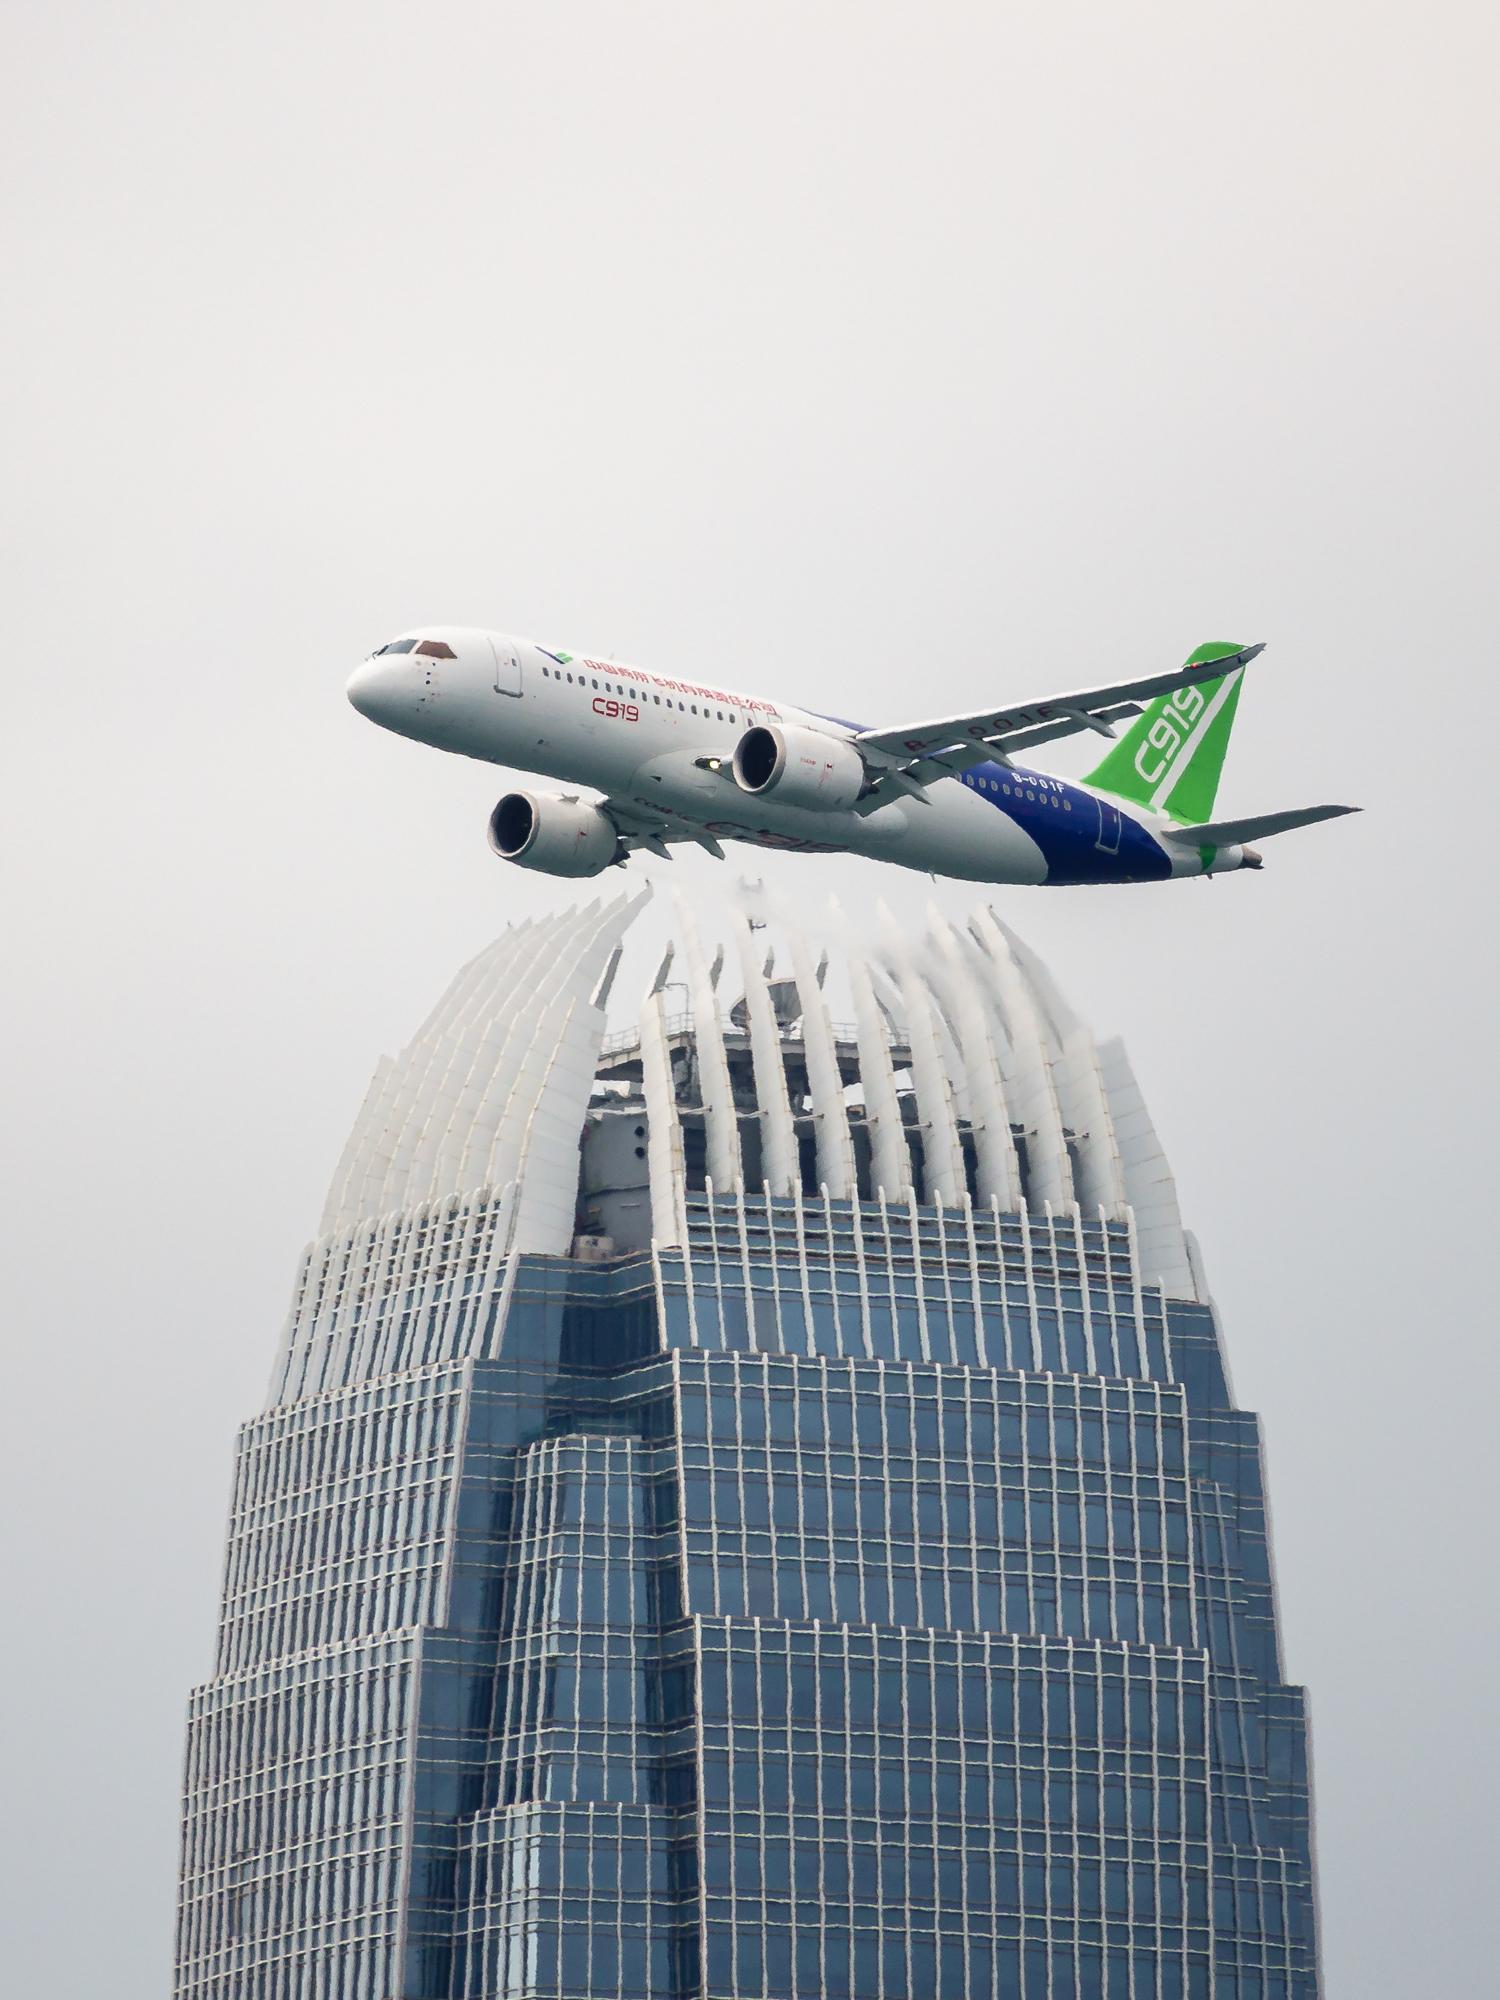 The results of the C919 Aircraft Flight Demonstration in Hong Kong Photo Competition, jointly organised by the Transport and Logistics Bureau and the Airport Authority Hong Kong, were announced today (January 26). Picture shows the first runner-up photo of the competition.